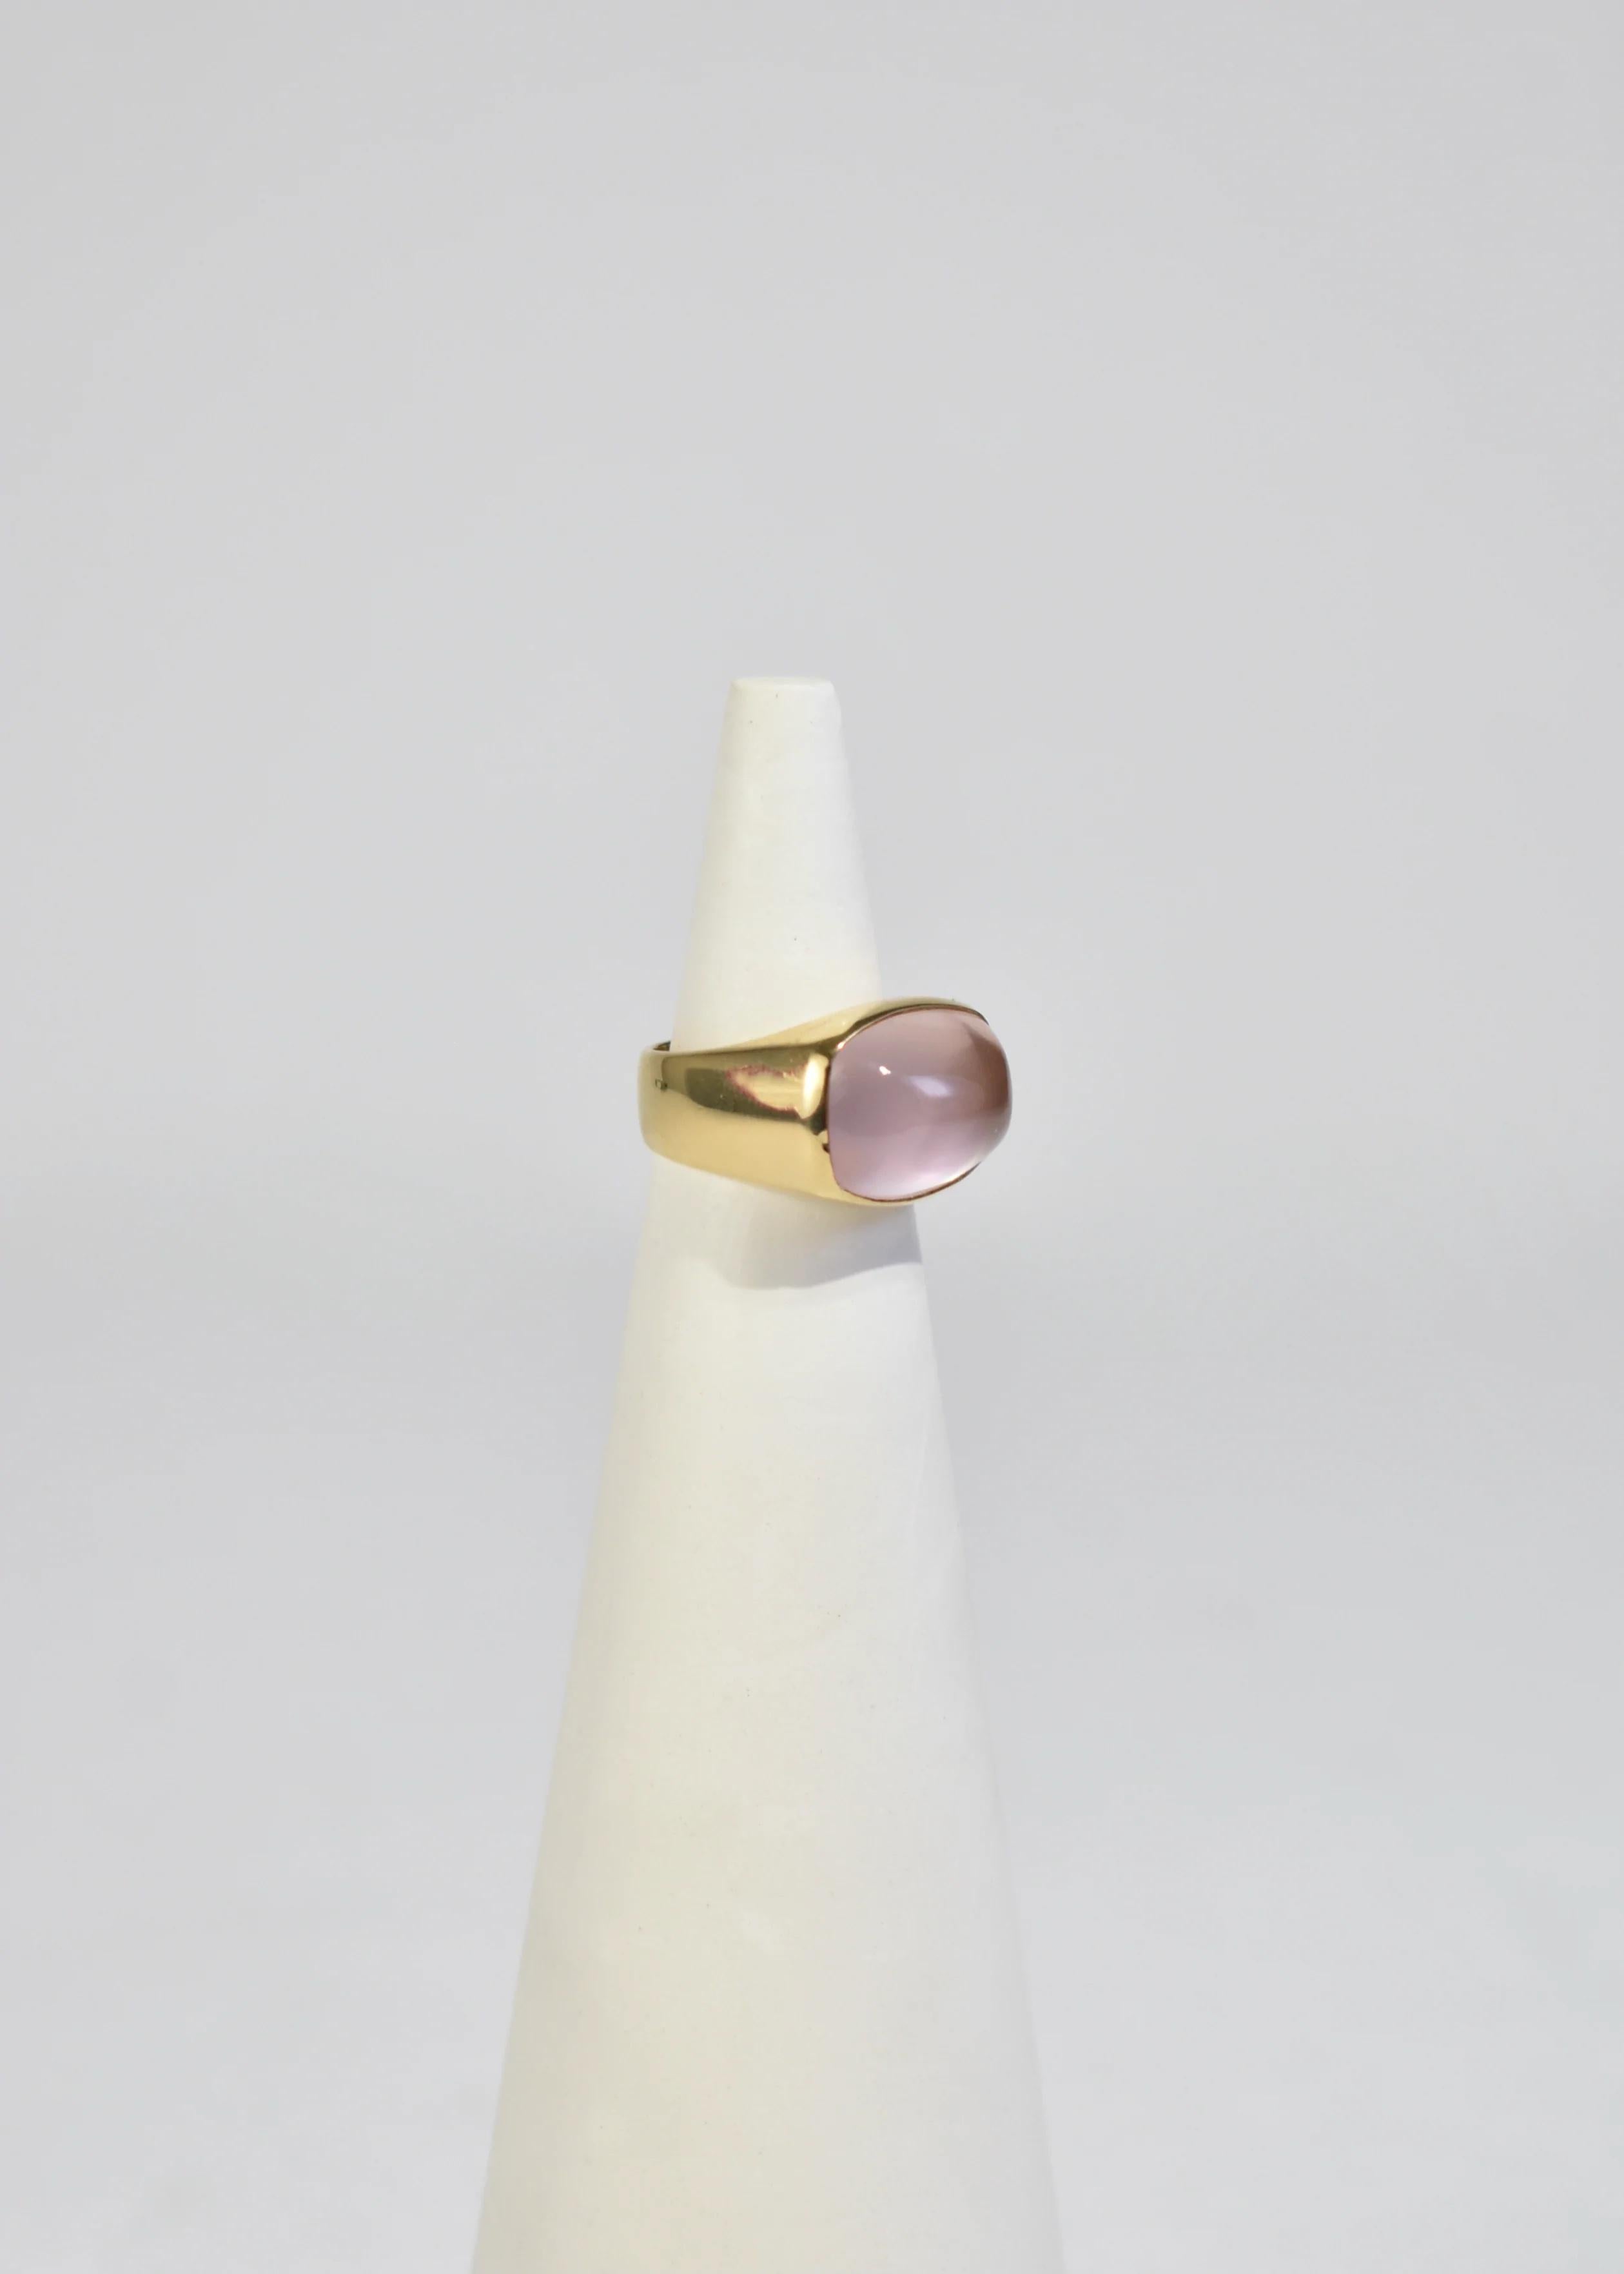 Stunning vintage gold ring with oversized polished rose quartz cabochon.

Material: 18k gold, rose quartz.

We recommend storing in a dry place and periodic polishing with a cloth. 